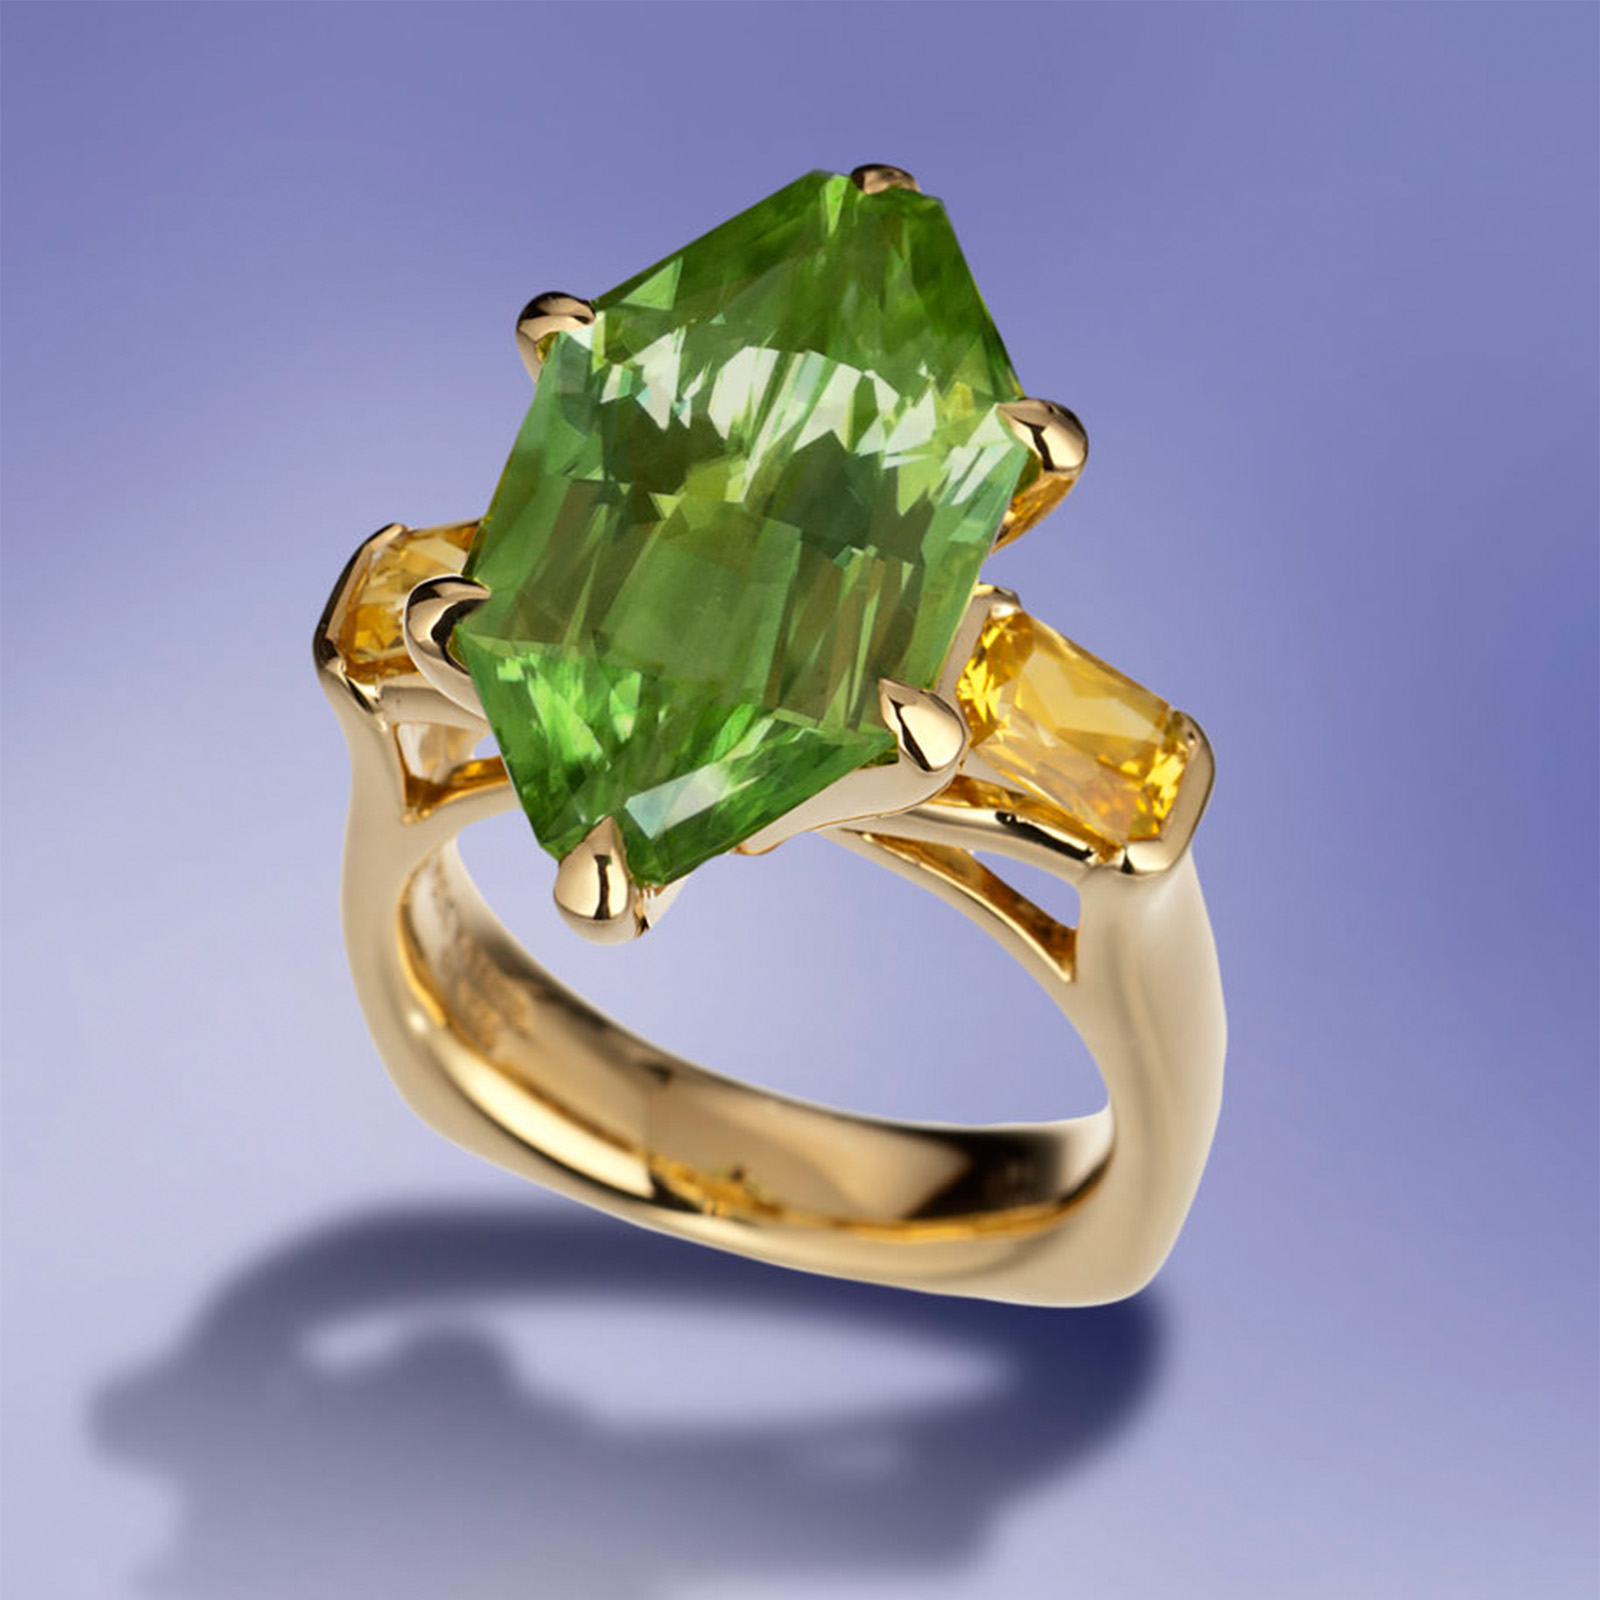 Citrus Dawn Ring, three-stone ring in 18 karat yellow gold featuring 10.86 carats designer-cut Peridot accented by 1.29 carats pair of Yellow Sapphire.